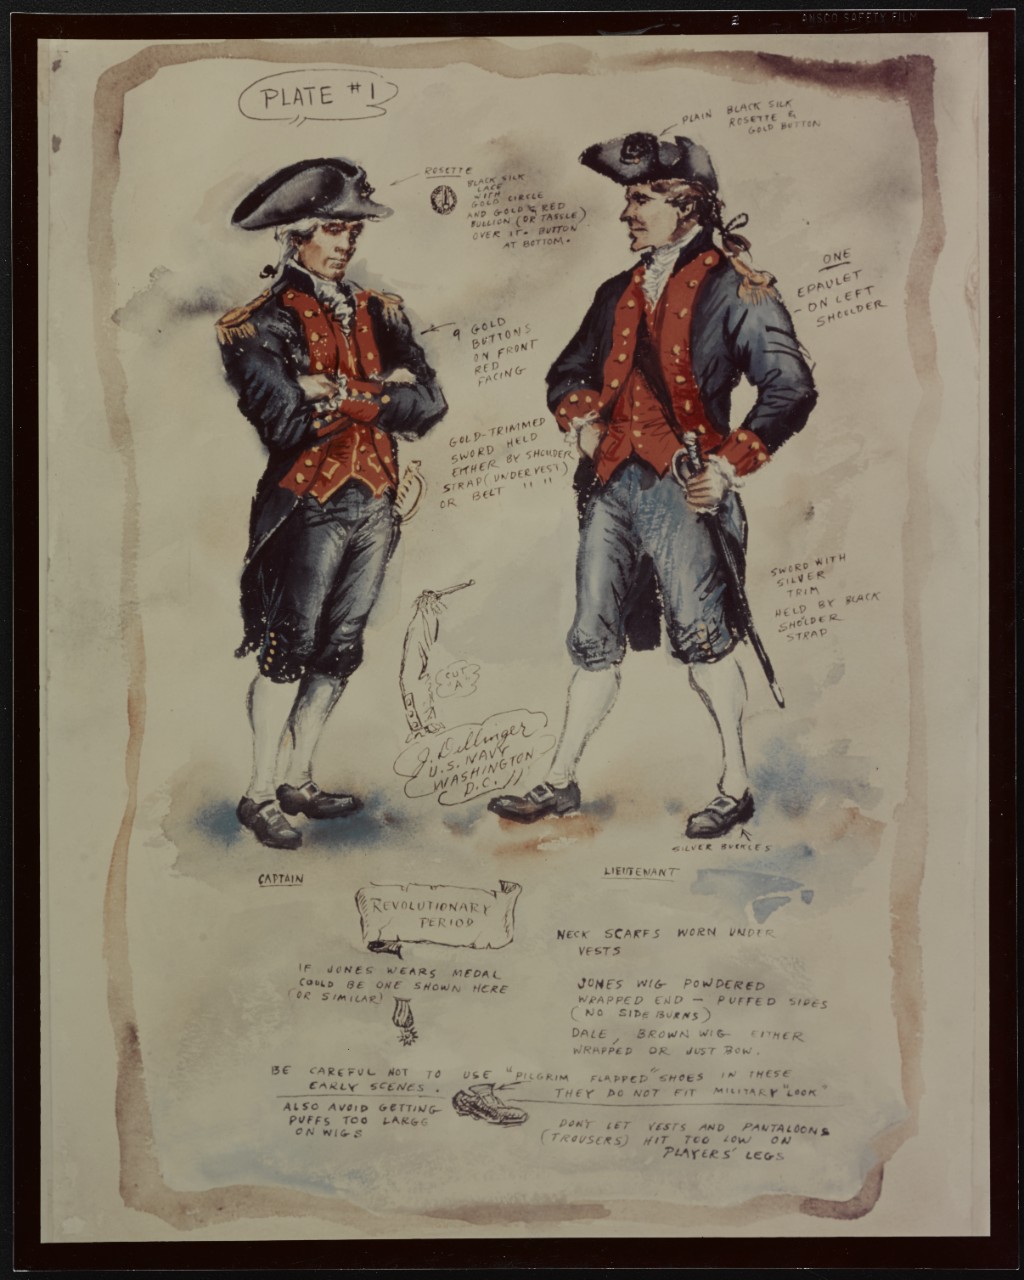 Drawing of Uniforms, Captain and Lieutenant Uniforms from Revolutionary War Period